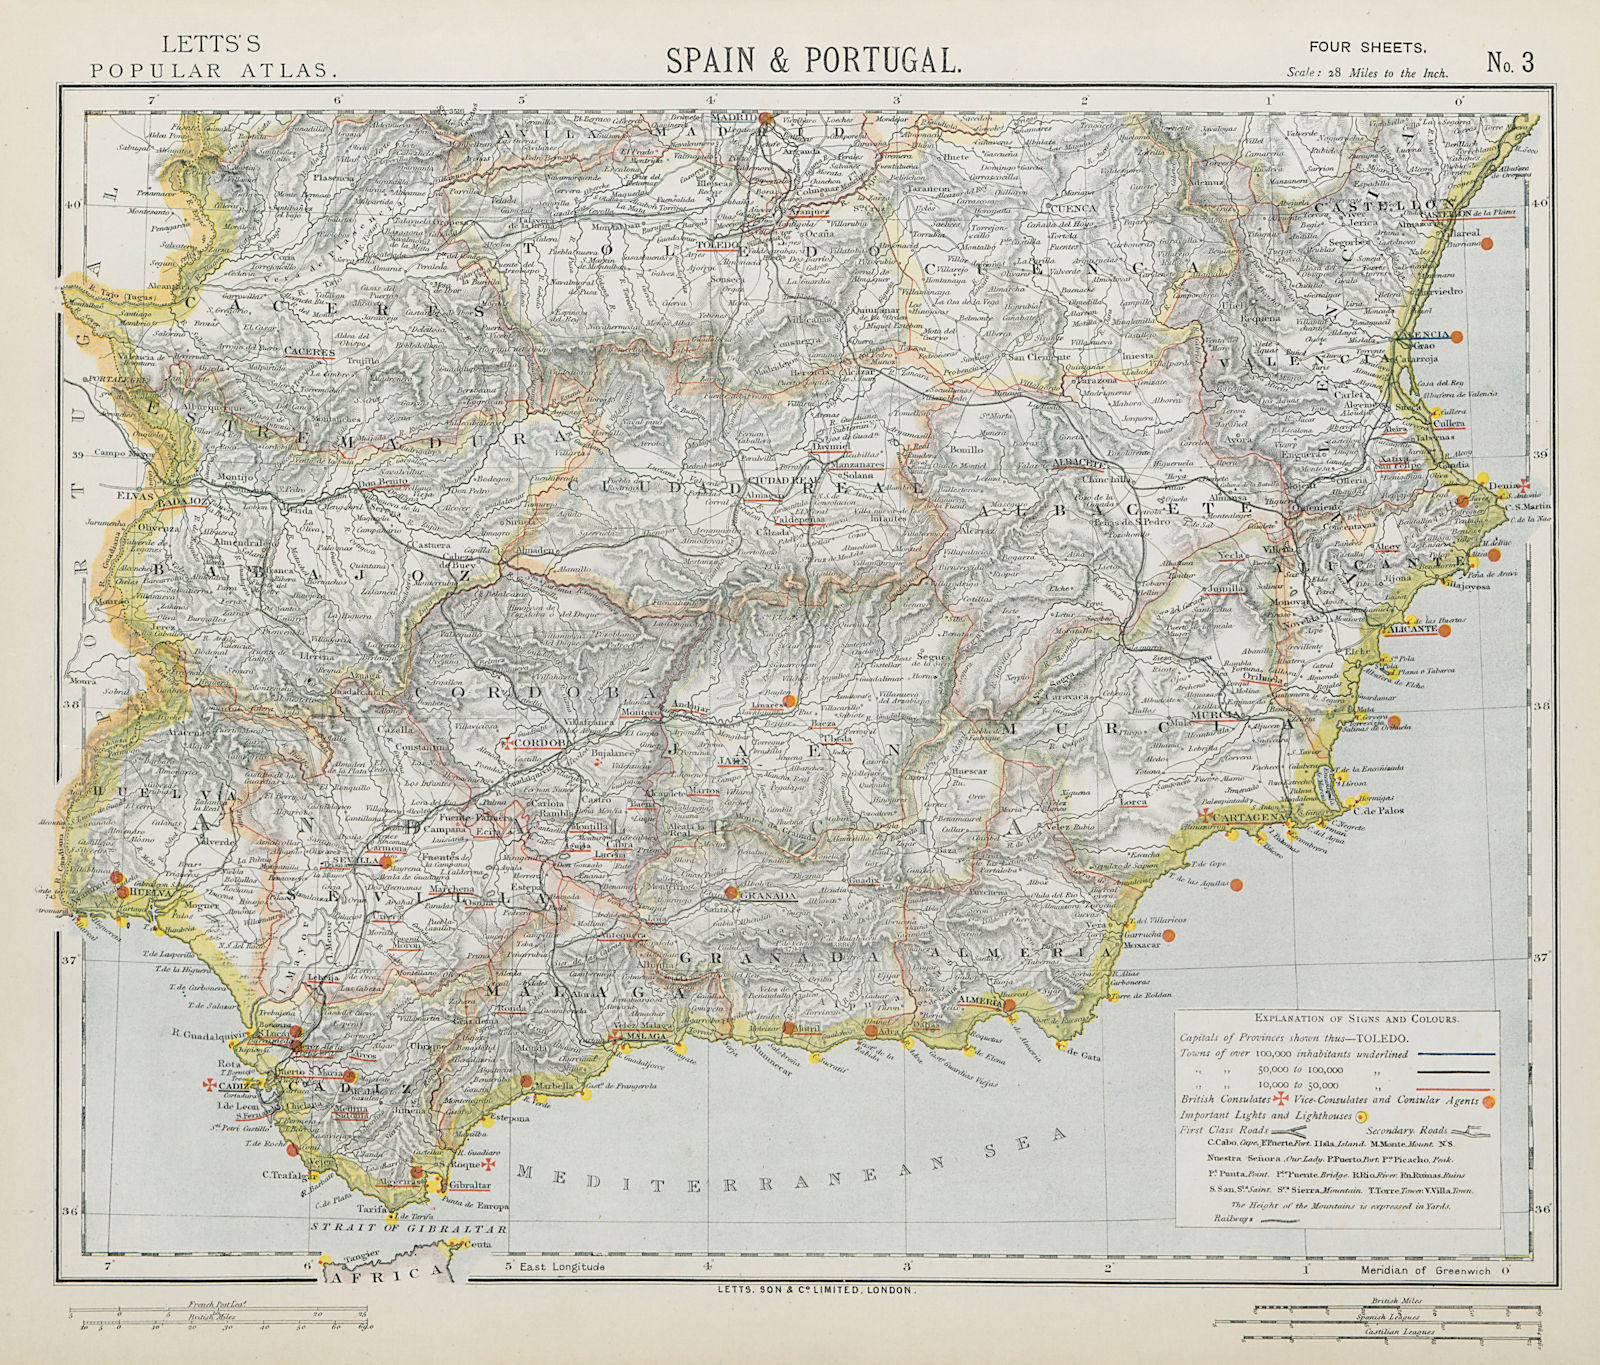 Associate Product SOUTHERN SPAIN SOUTH Railways Lighthouses British Consulates. LETTS 1884 map